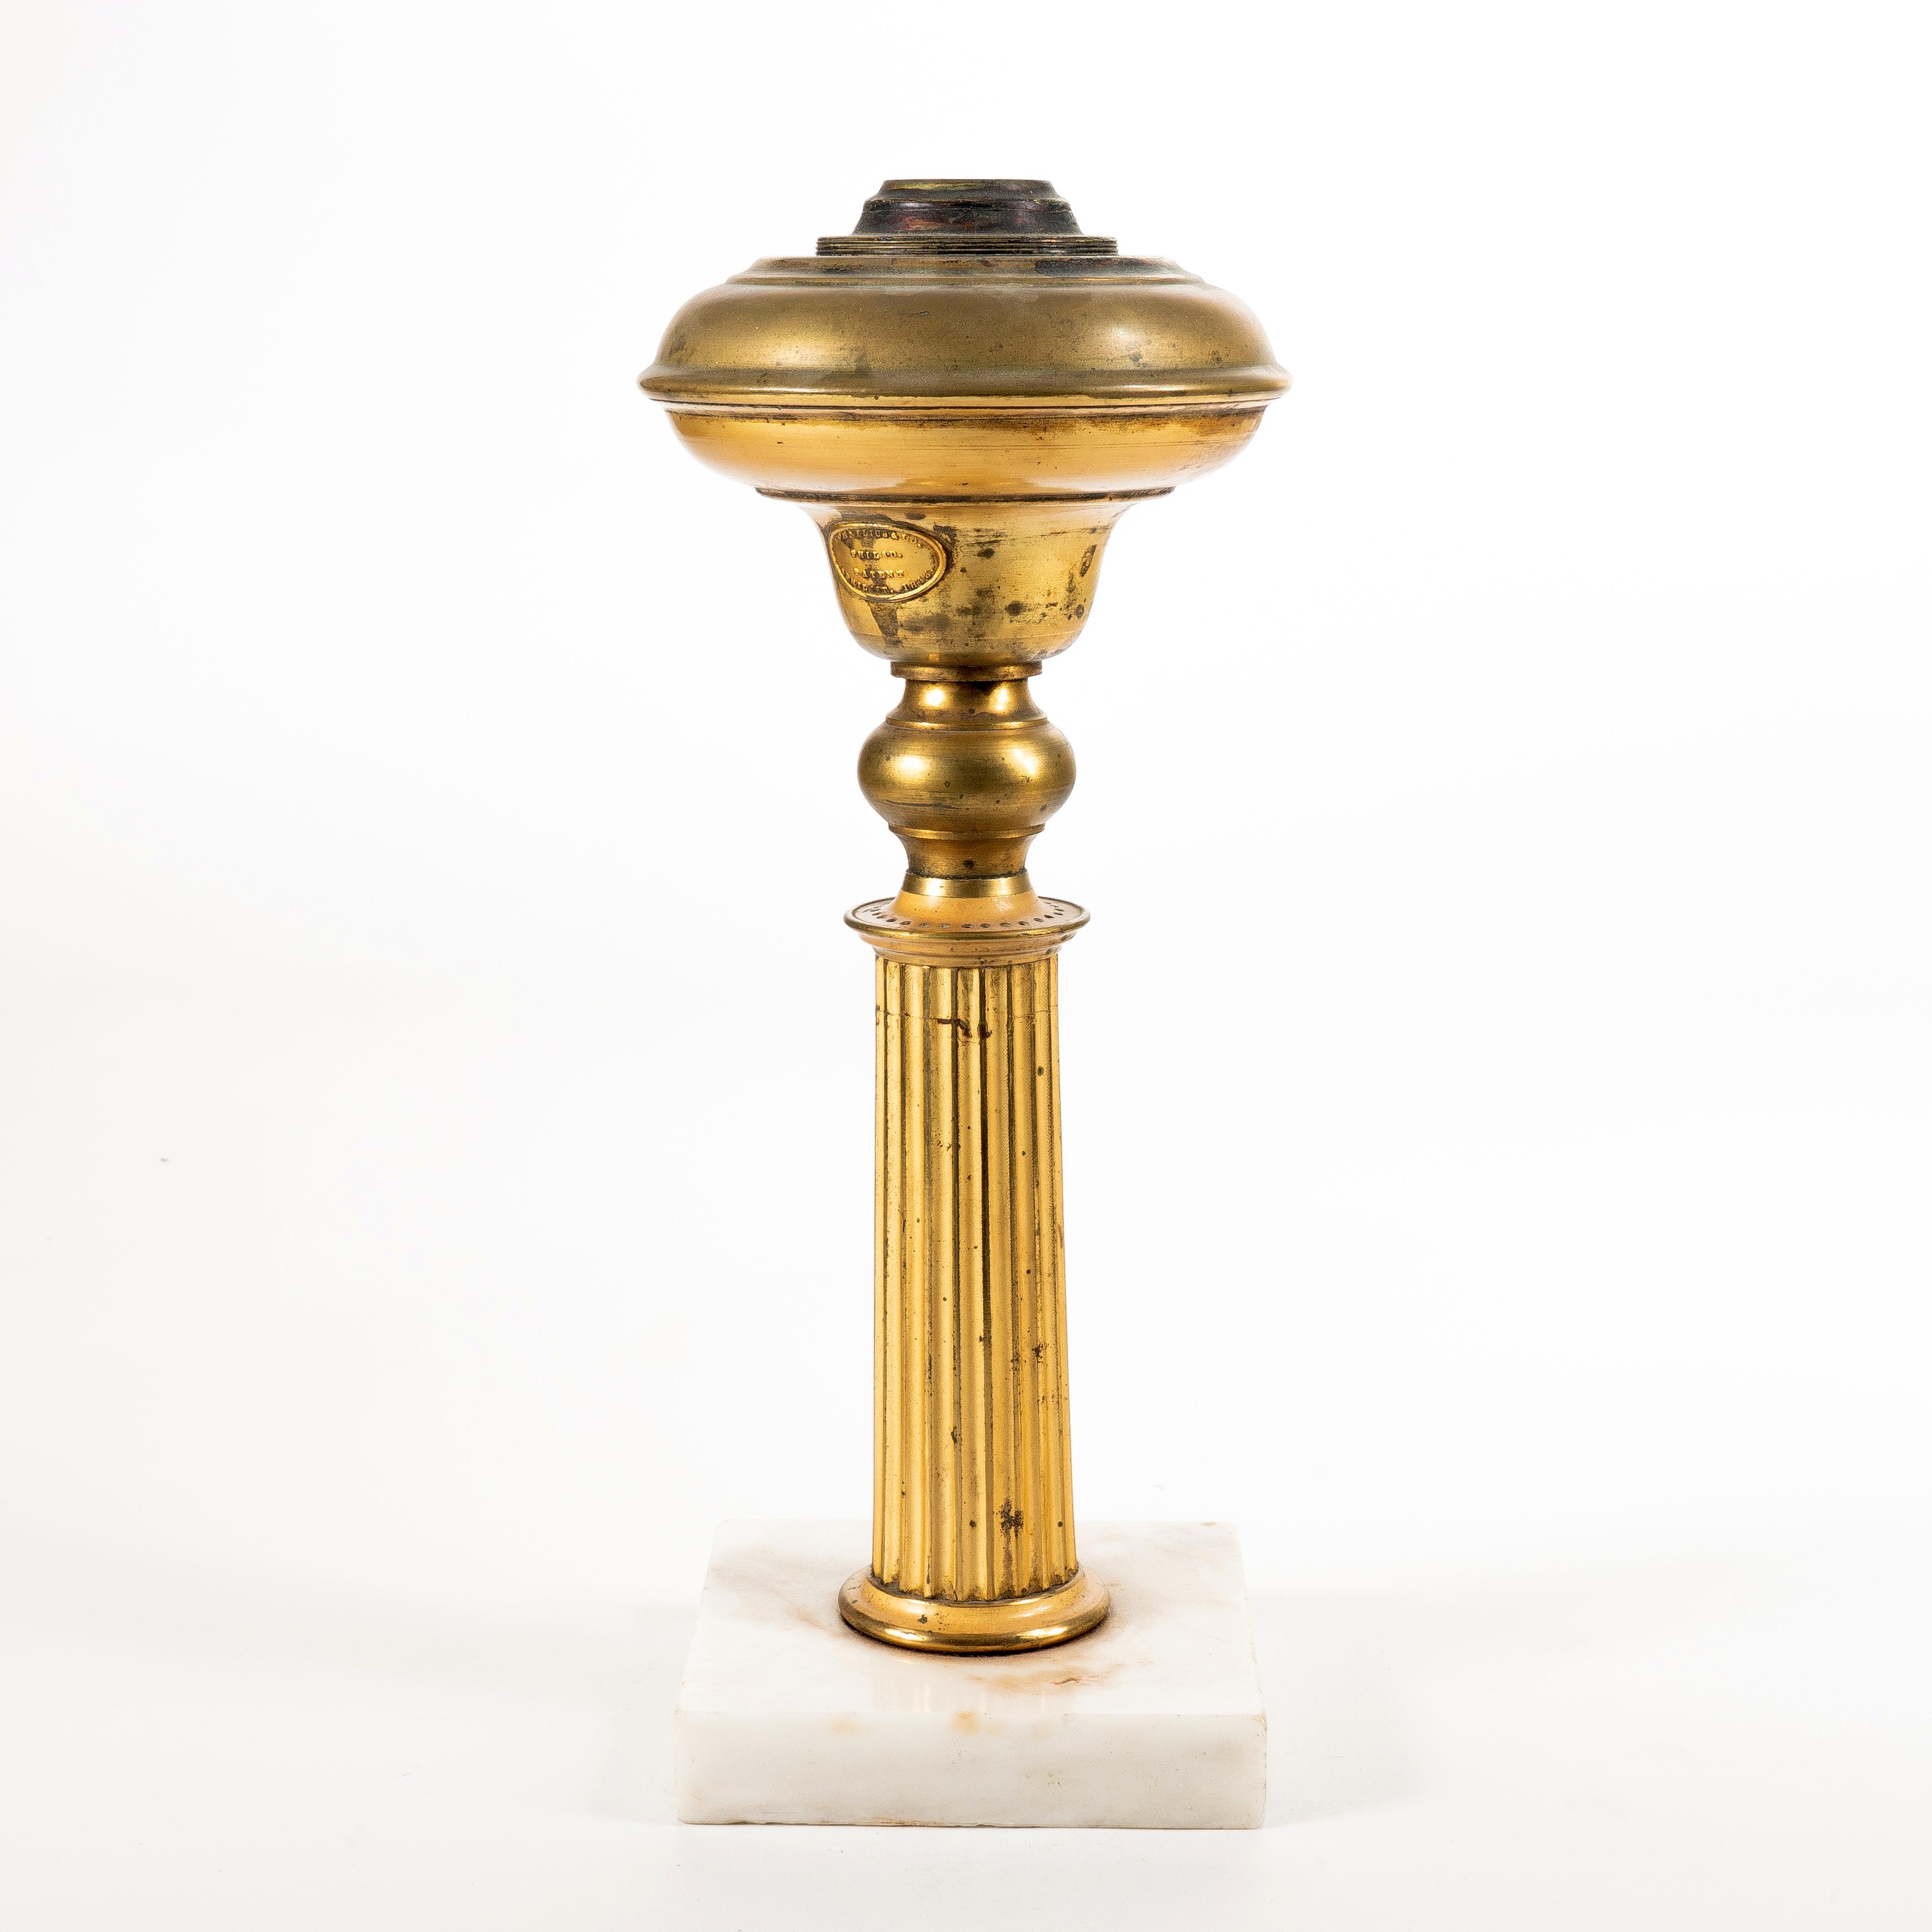 Fluted brass doric column astral lamp on a white marble base with compressed ball neck supporting a pear shaped font. The lamp retains its original gilt lacquer finish.
American, Philadelphia, 1843.